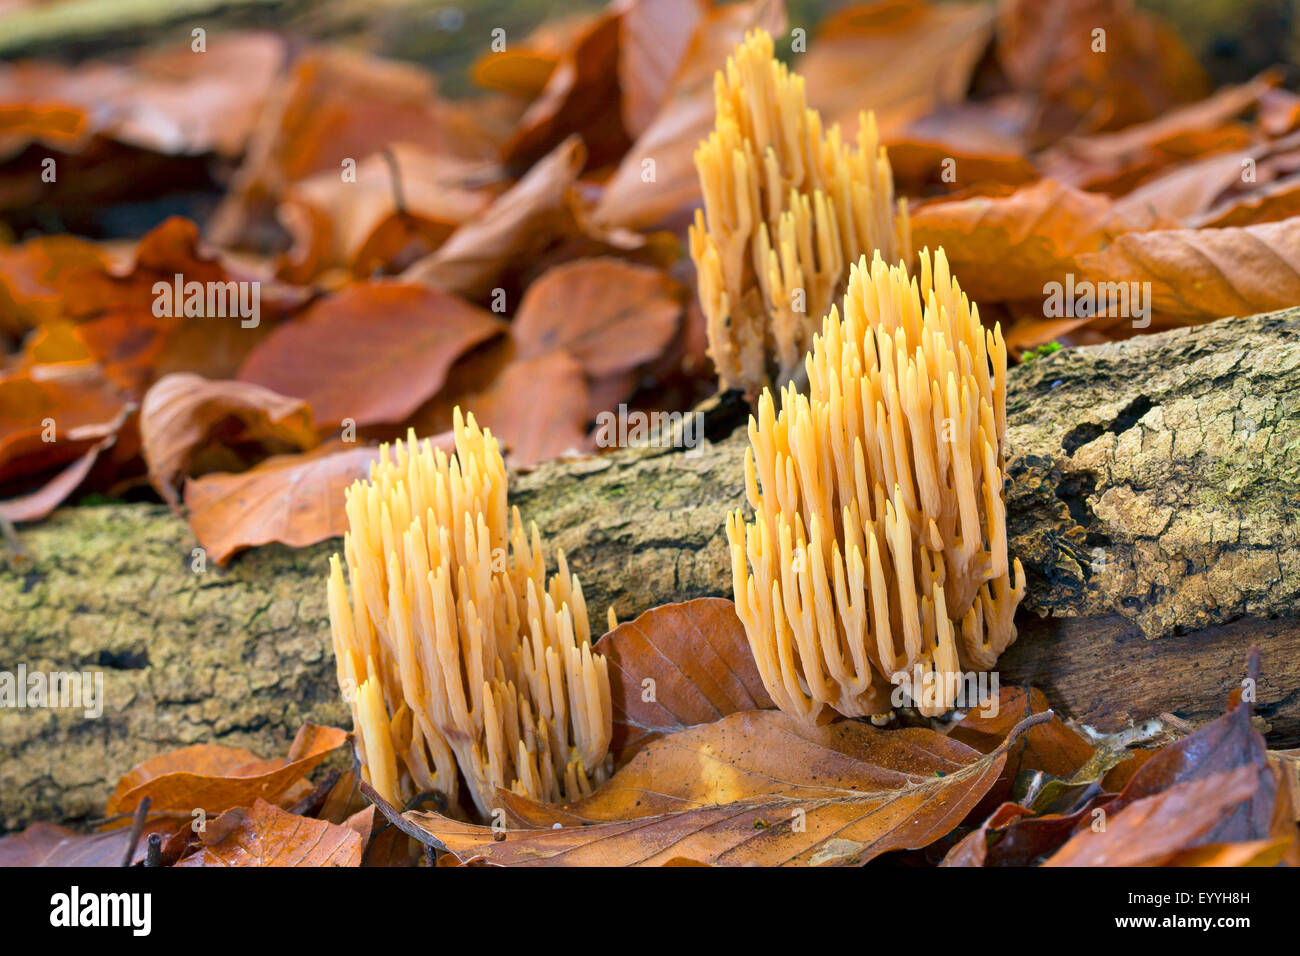 Upright Coral, strict-branch coral (Ramaria stricta, Clavariella condensata, Clavariella stricta), on dead wood in a beech forest, Germany Stock Photo